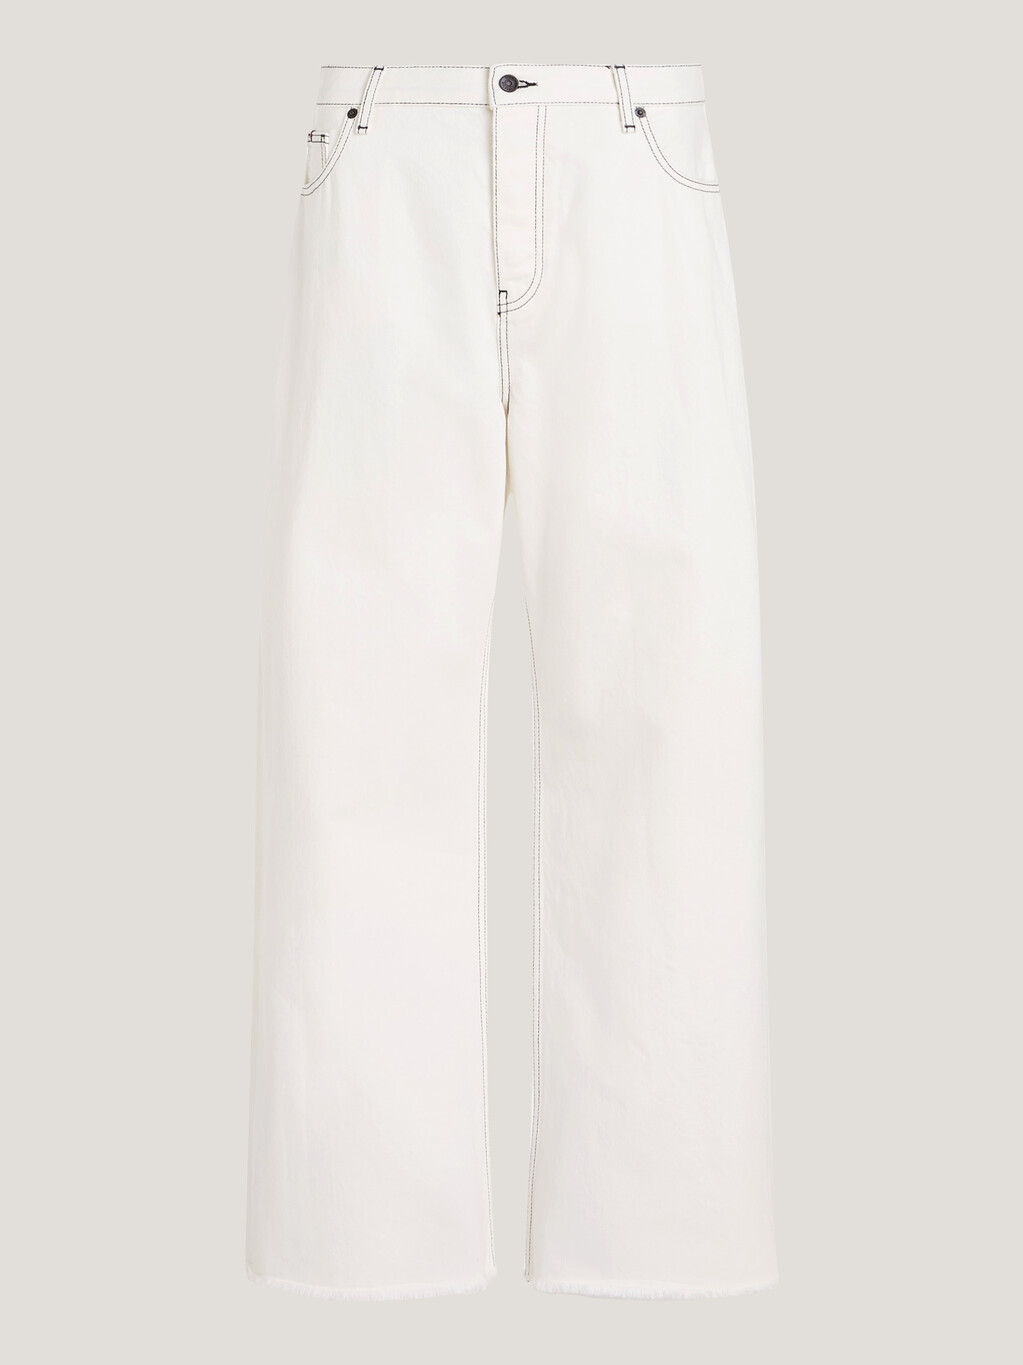 Mid Rise Oversized Slouchy White Jeans, Ecru, hi-res